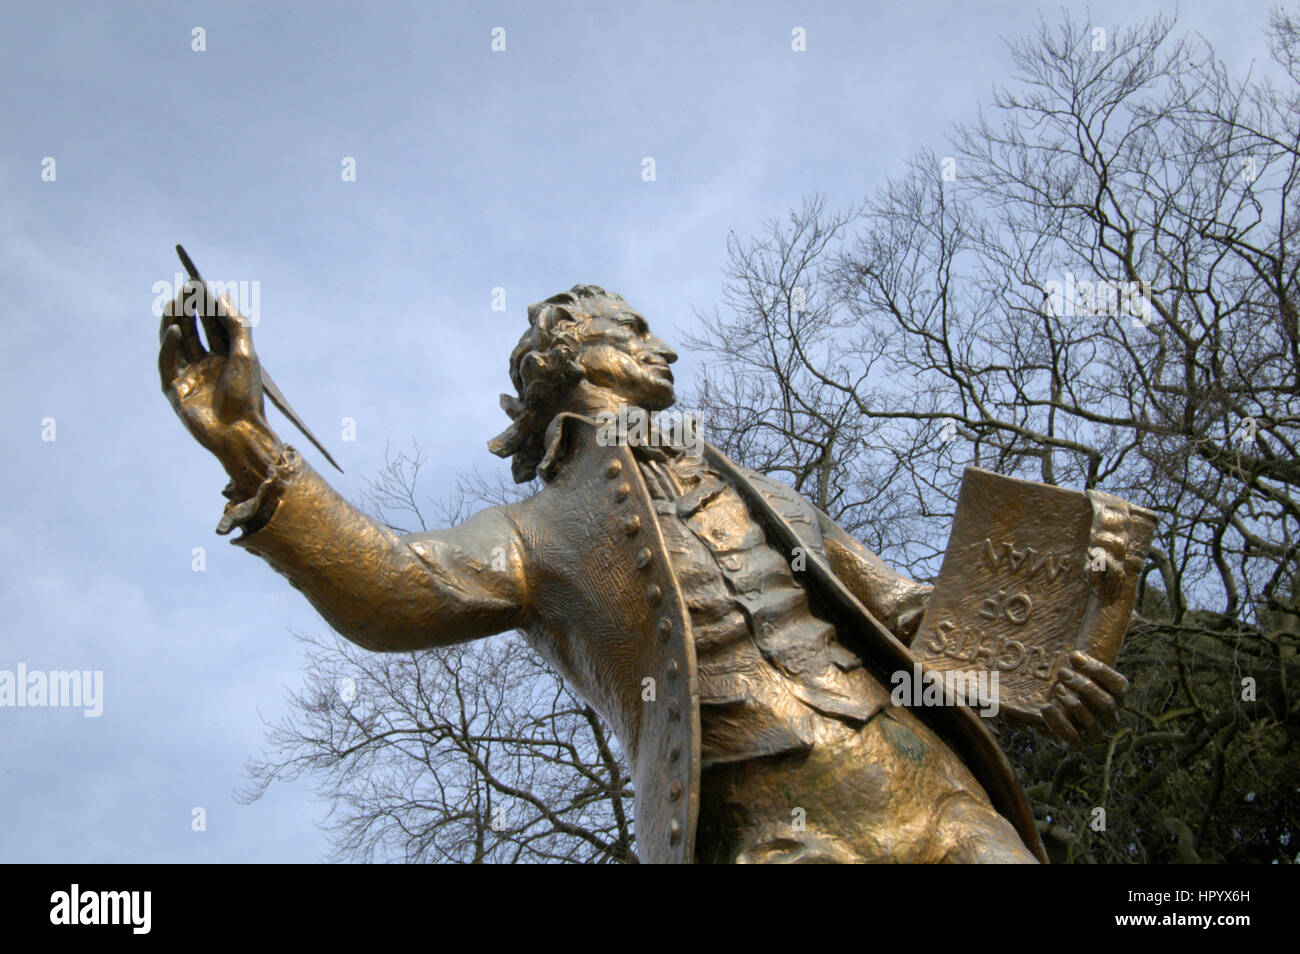 Statue of Thomas Paine, author of the  rights of man, Thetford, Norfolk, England, UK. Stock Photo